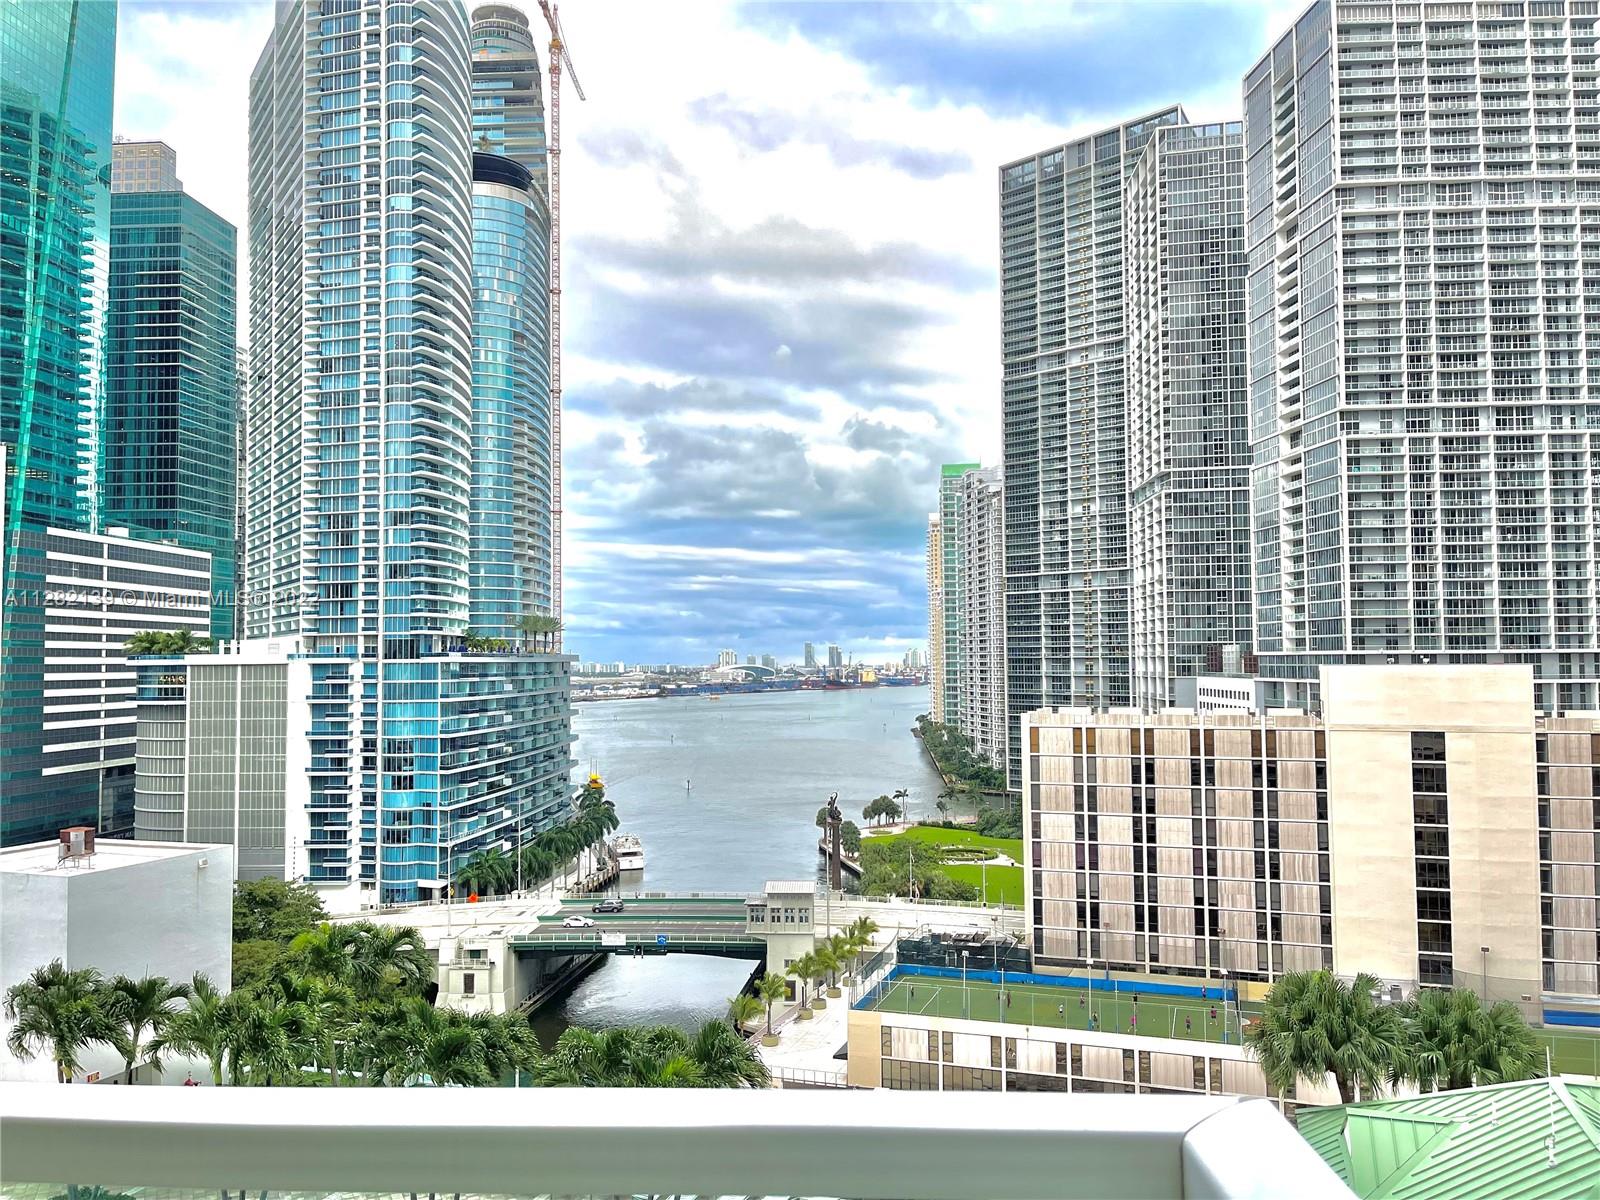 Amazing 2 Bedrooms / 2Bathrooms unit in the Heart of Brickell, one of the coolest most energetic  neighborhoods in the World. This gorgeous unit offers stunning views of the Bay, City and Miami River. 1,051 SQFT, wood floors, modern kitchen with granite countertops. Brand new refrigerator and A/C. Split bedroom layout offers space and privacy. Resort style amenities including Spa, State-of-the art fitness center, business center, pool BBQ. Steps from Brickell City Centre, restaurants, wholefoods and more! Just minutes from Metro Mover station.